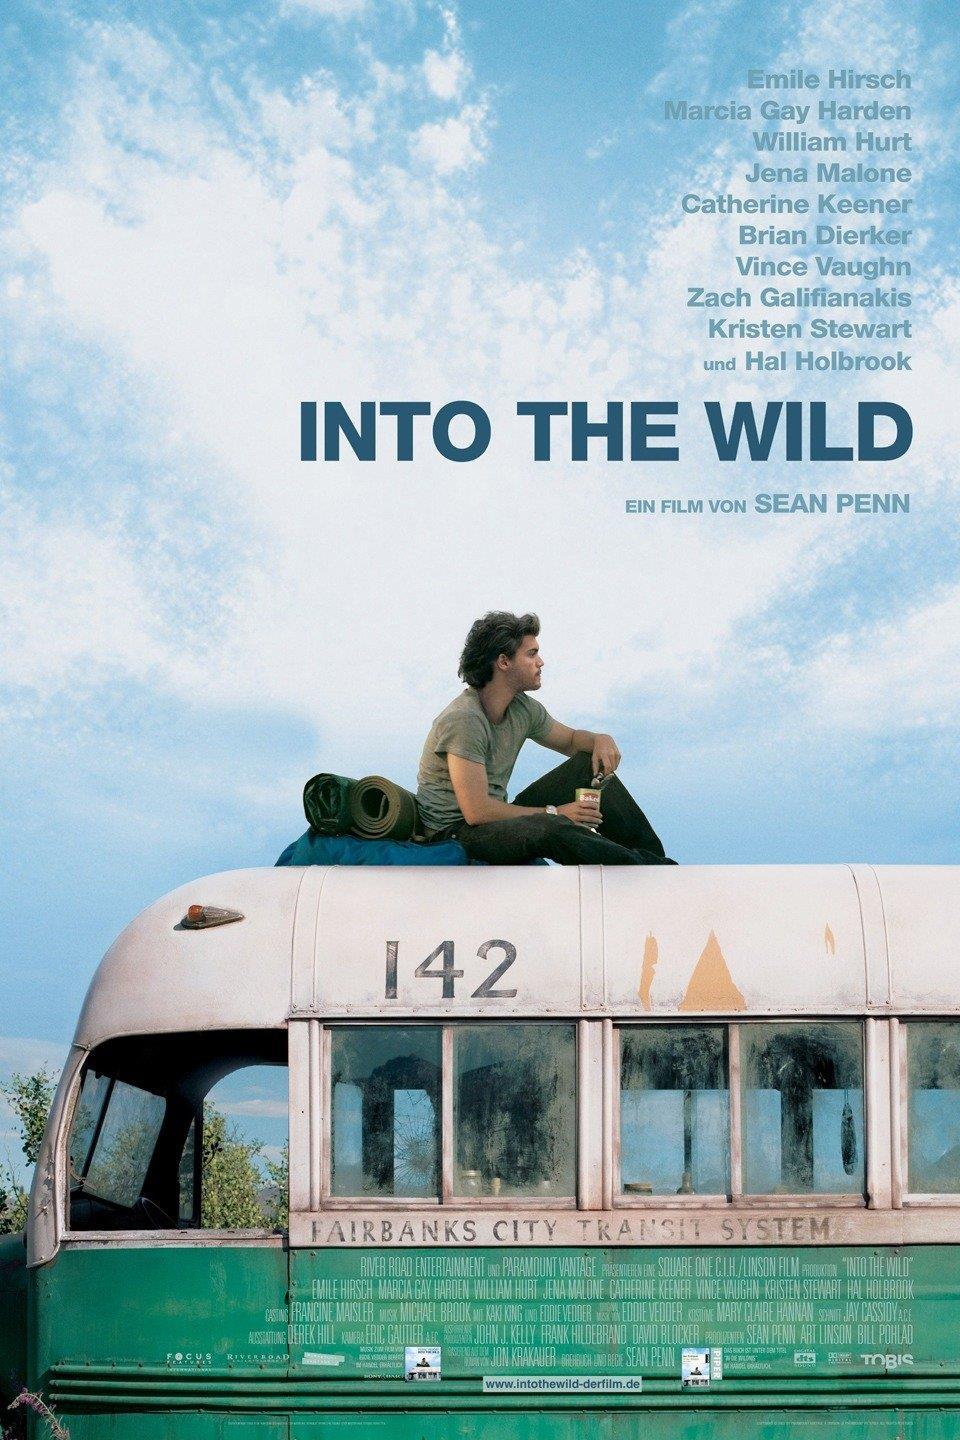 Example of Transcendentalism in Modern Culture Into The Wild Movie Trailer Sean Penn, the director of the film, adds cinematic effects to make the film even more in touch with its Transcendental